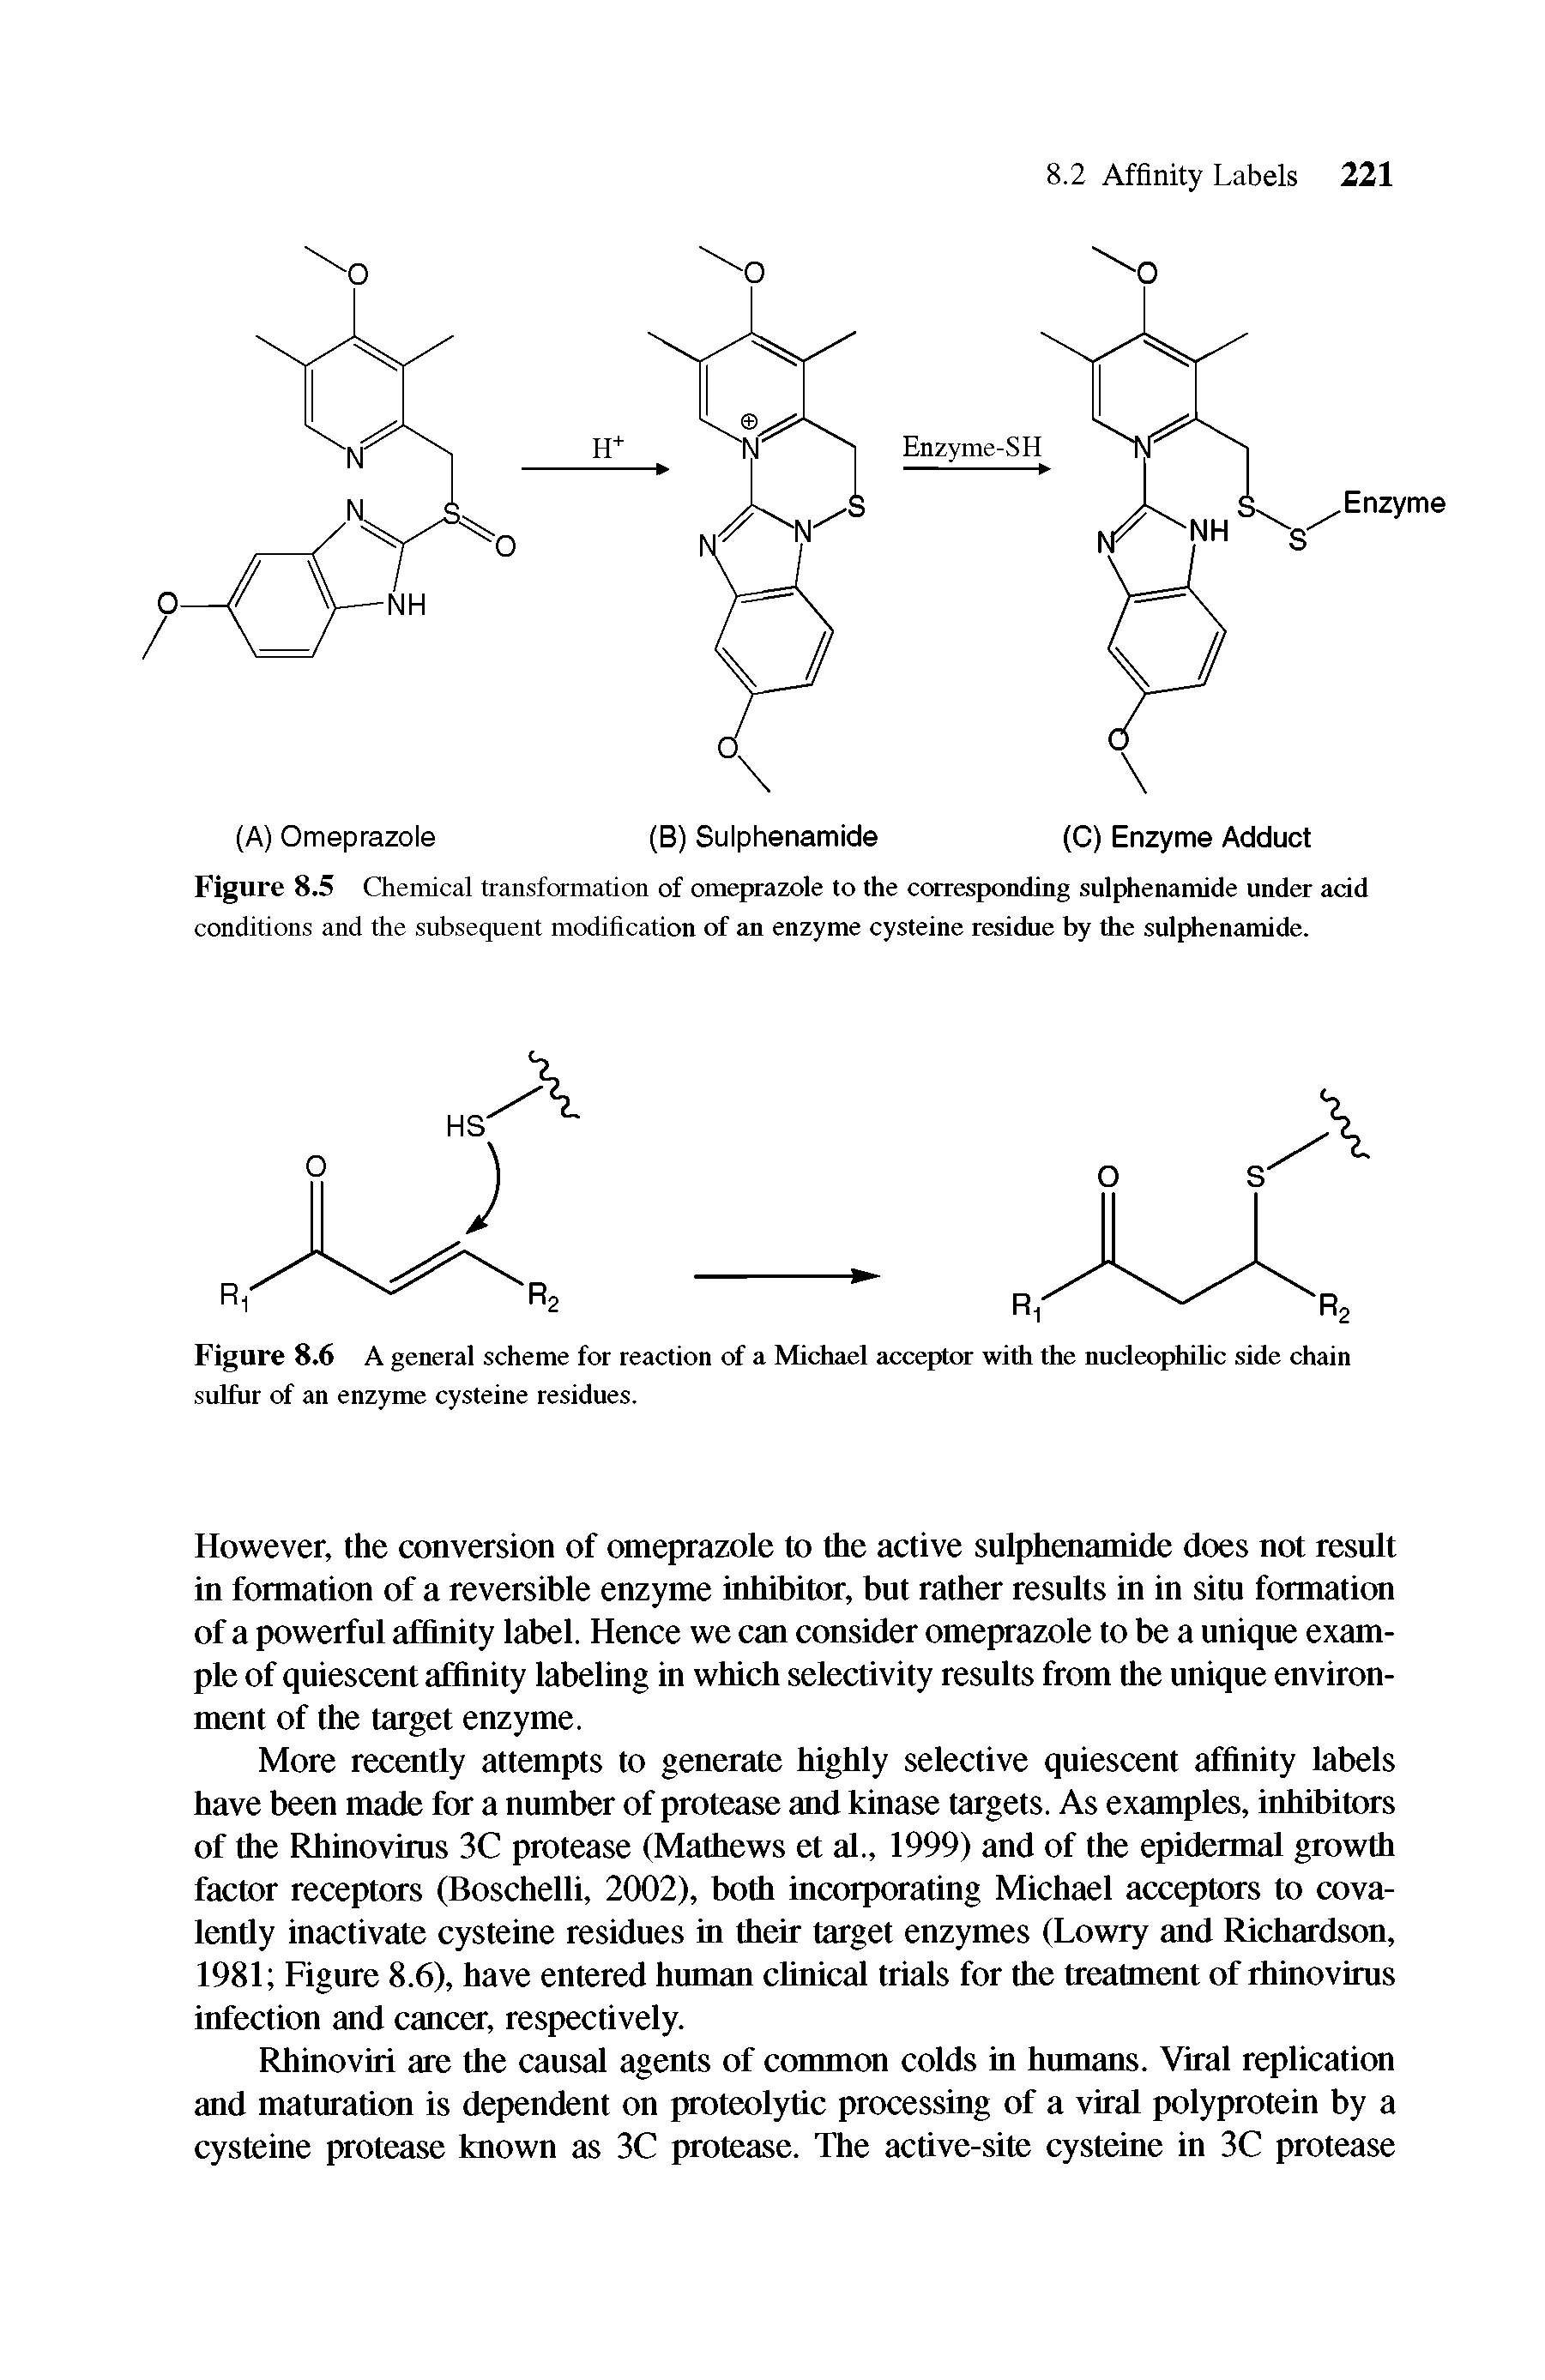 Figure 8.5 Chemical transformation of omeprazole to the corresponding sulphenamide under add conditions and the subsequent modification of an enzyme cysteine residue by the sulphenamide.